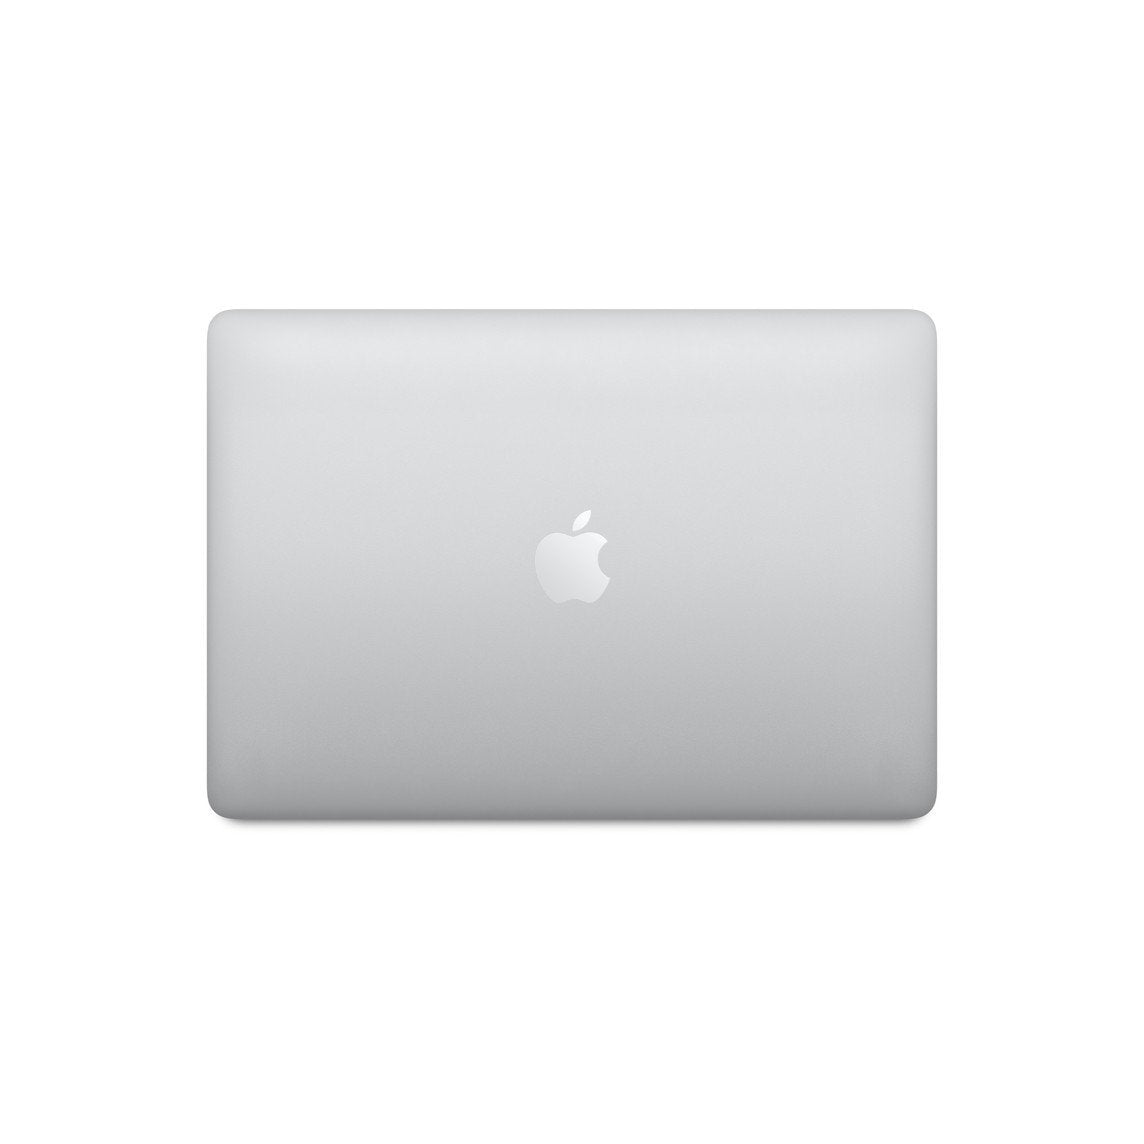 MNEJ3AB/A/13-inch MacBook Pro: Apple M2 chip with 8-core CPU and 10-core GPU, 512GB SSD - Space Grey 512 GB / Space grey / M2 Chip